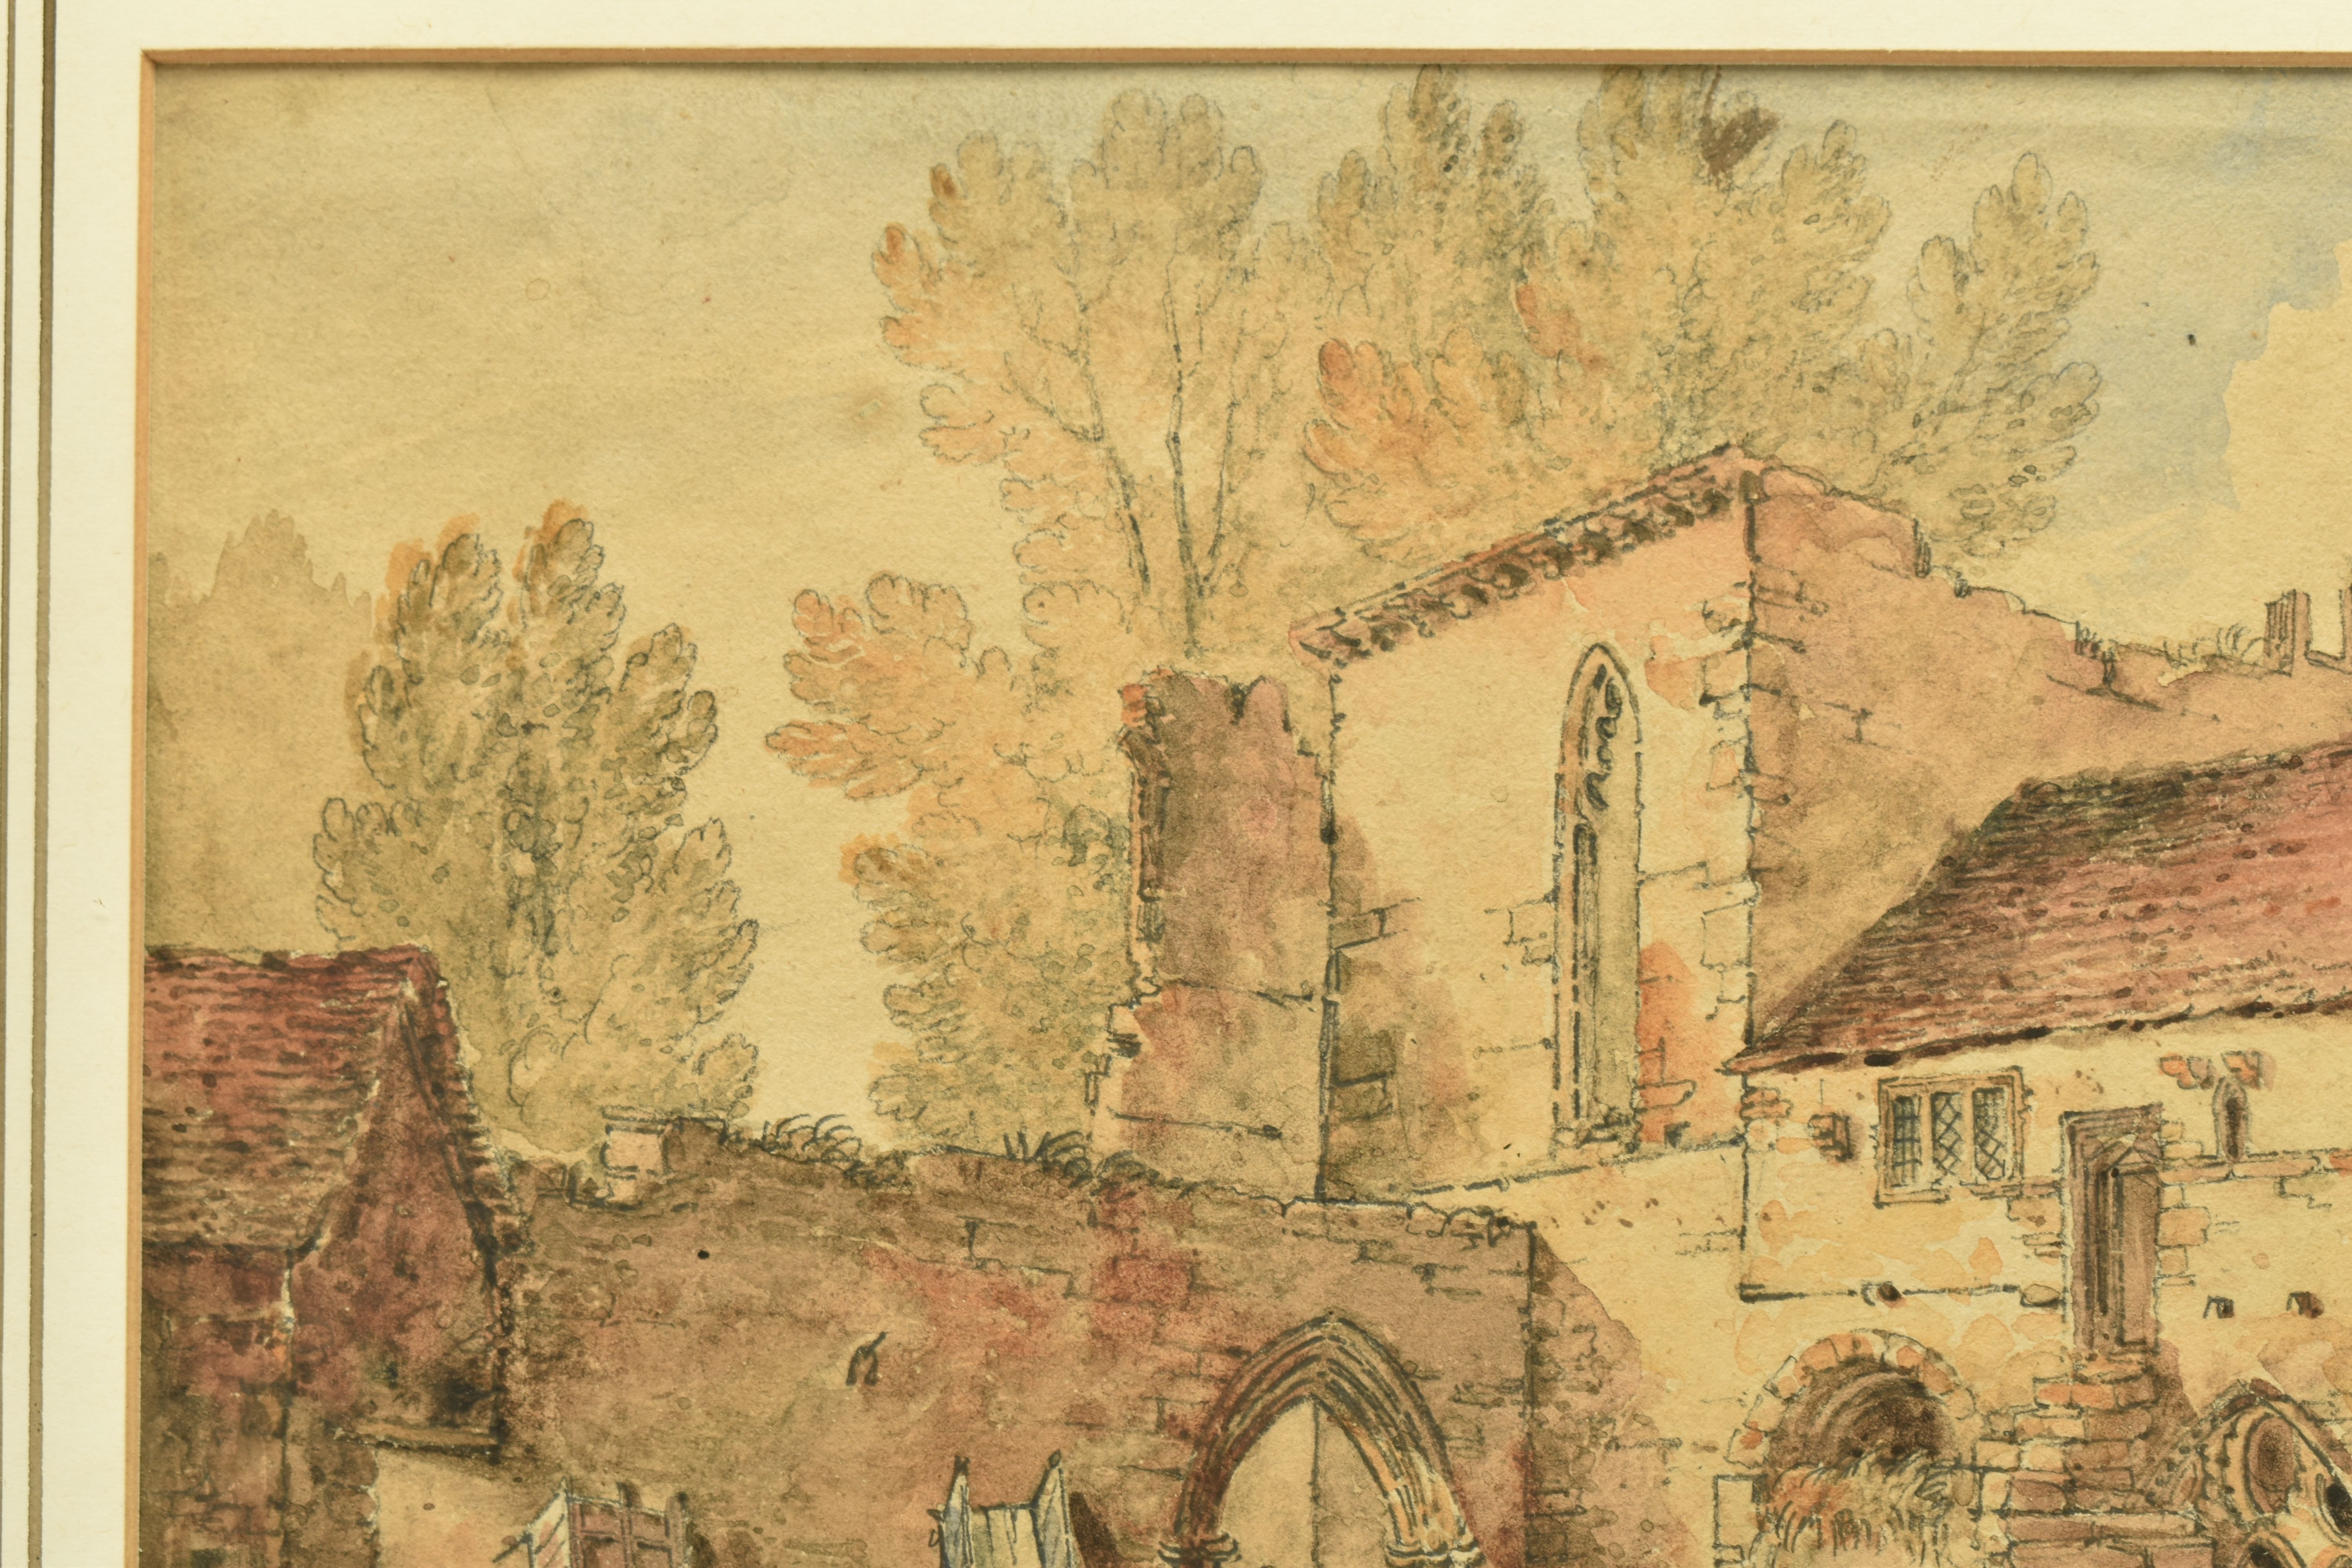 ATTRIBUTED TO JAMES BOURNE (1773-1854), 'VALLE CRUCIS ABBEY', a Welsh landscape near Llangollen, - Image 7 of 8